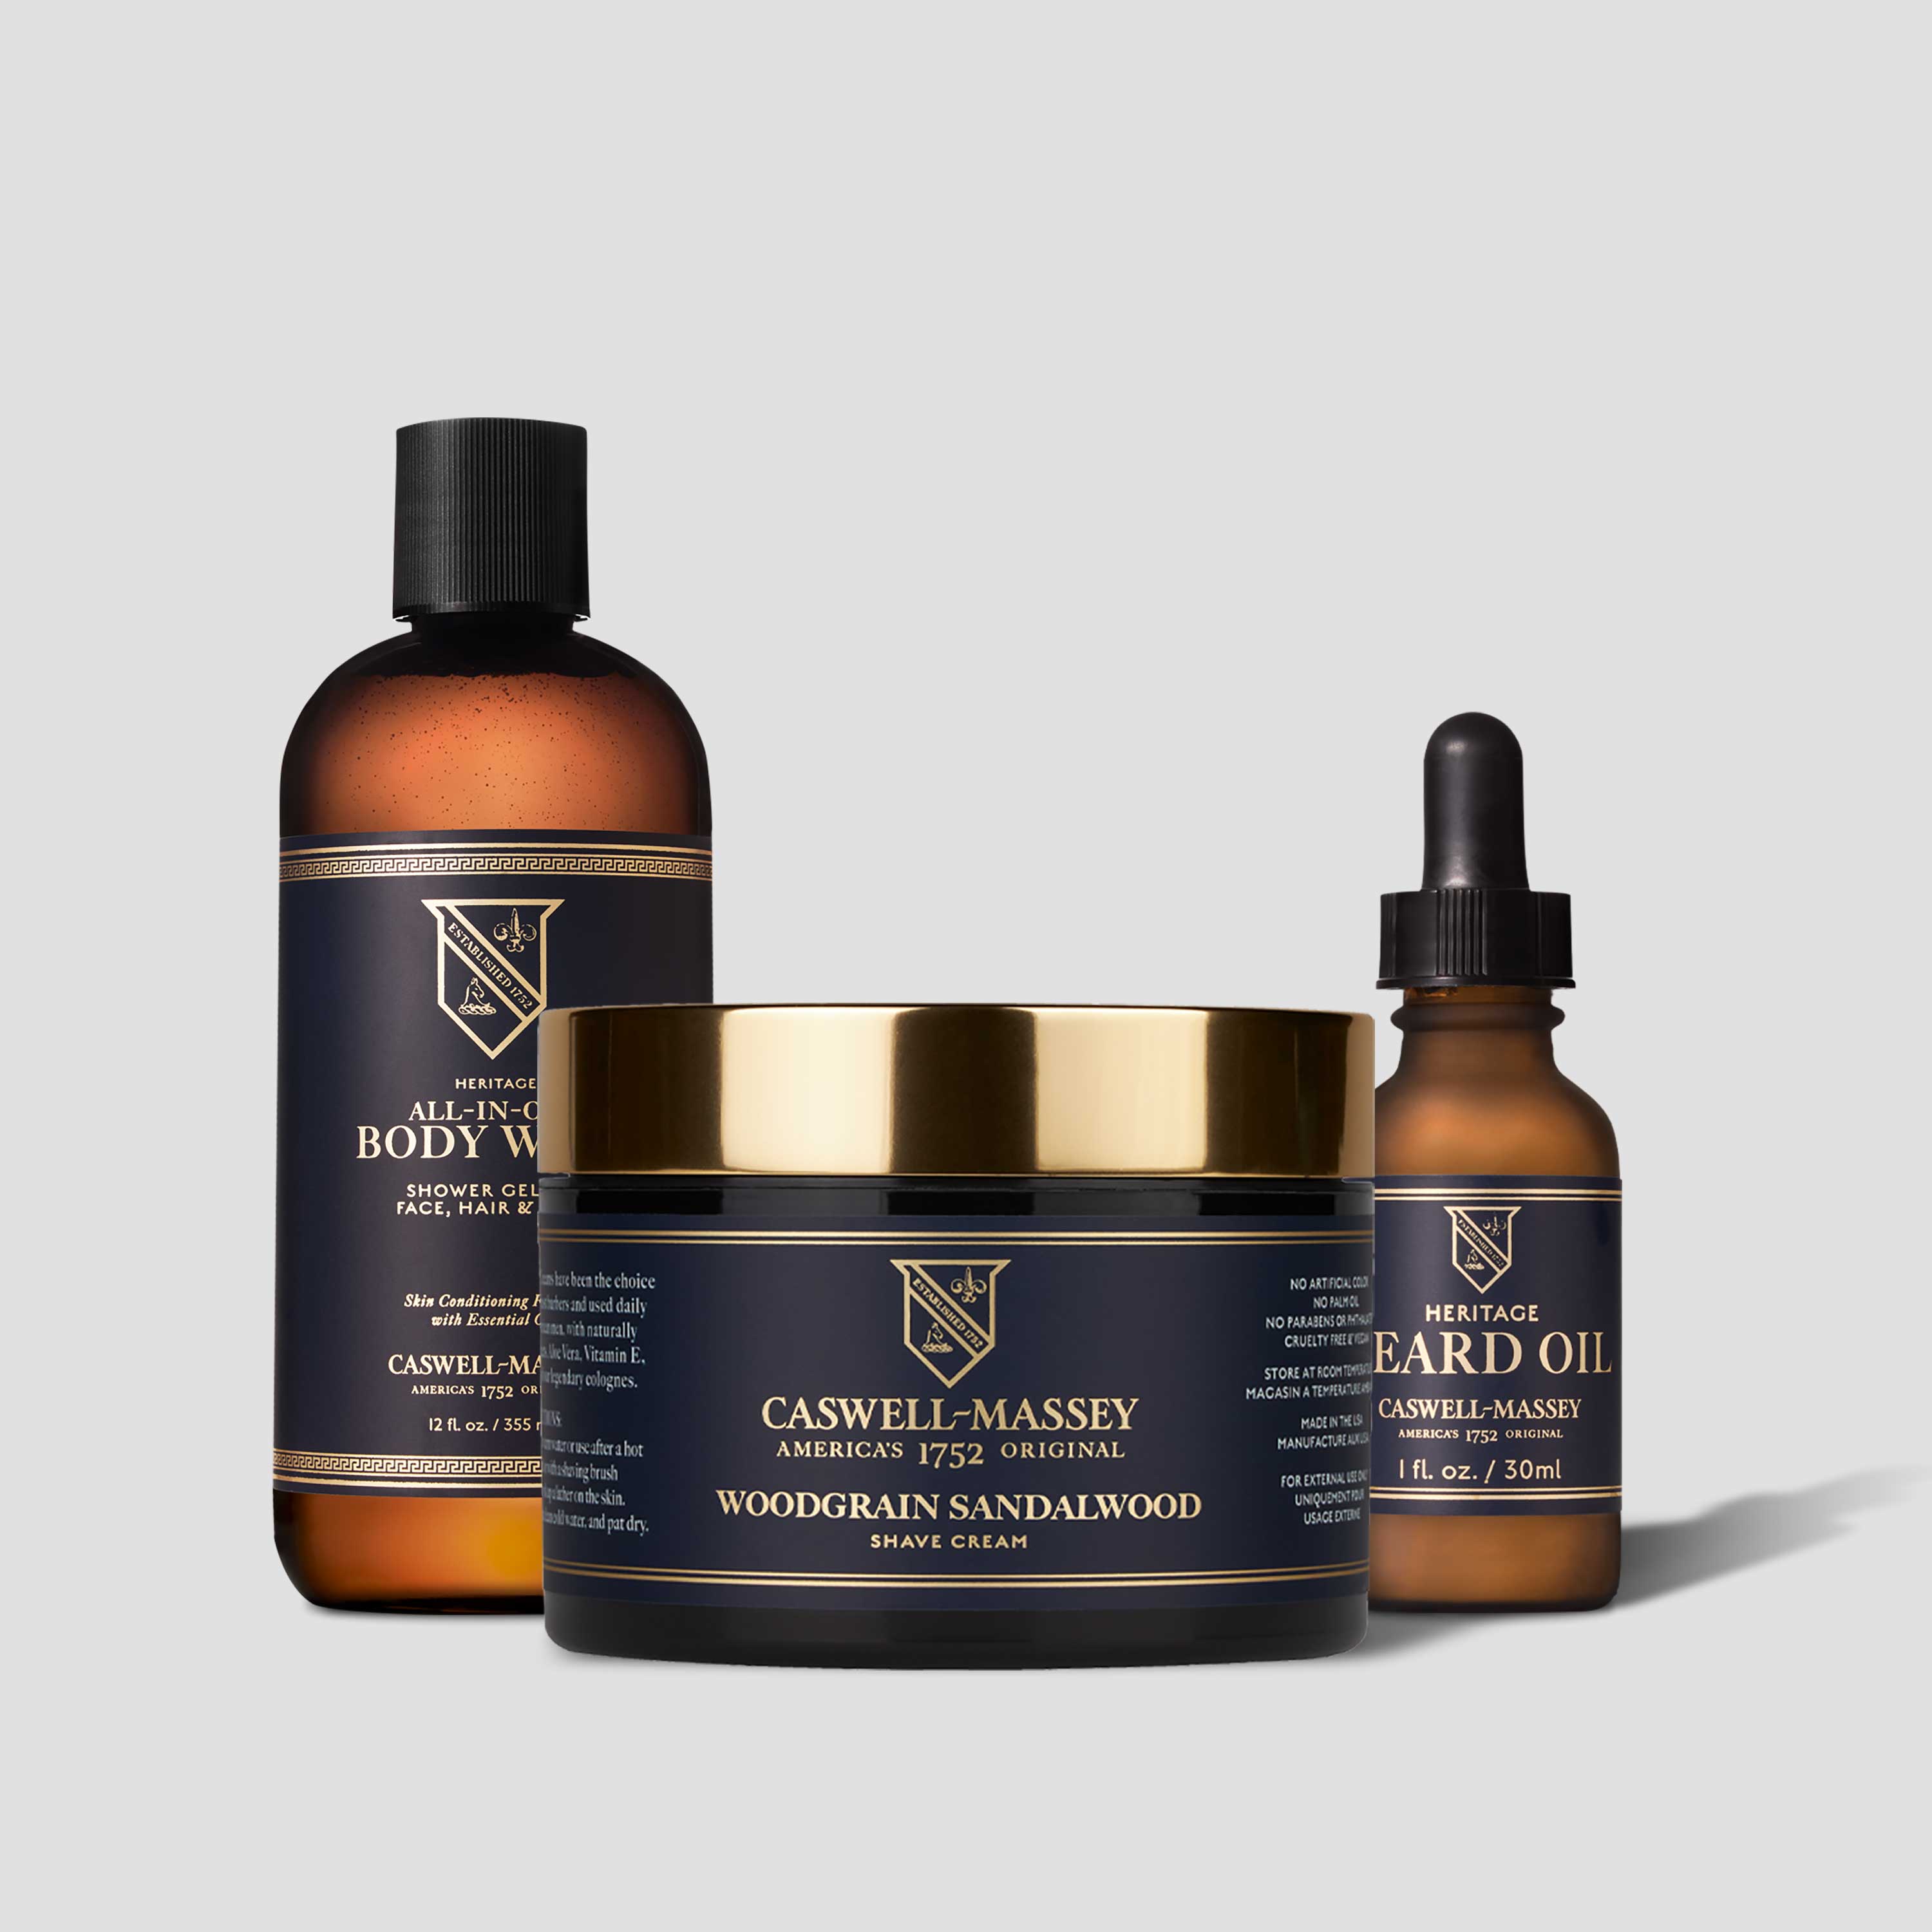 Caswell-Massey® Woodgrain Sandalwood Shave Cream, shown with Heritage All-in-One Body Wash and Heritage Face & Beard Oil